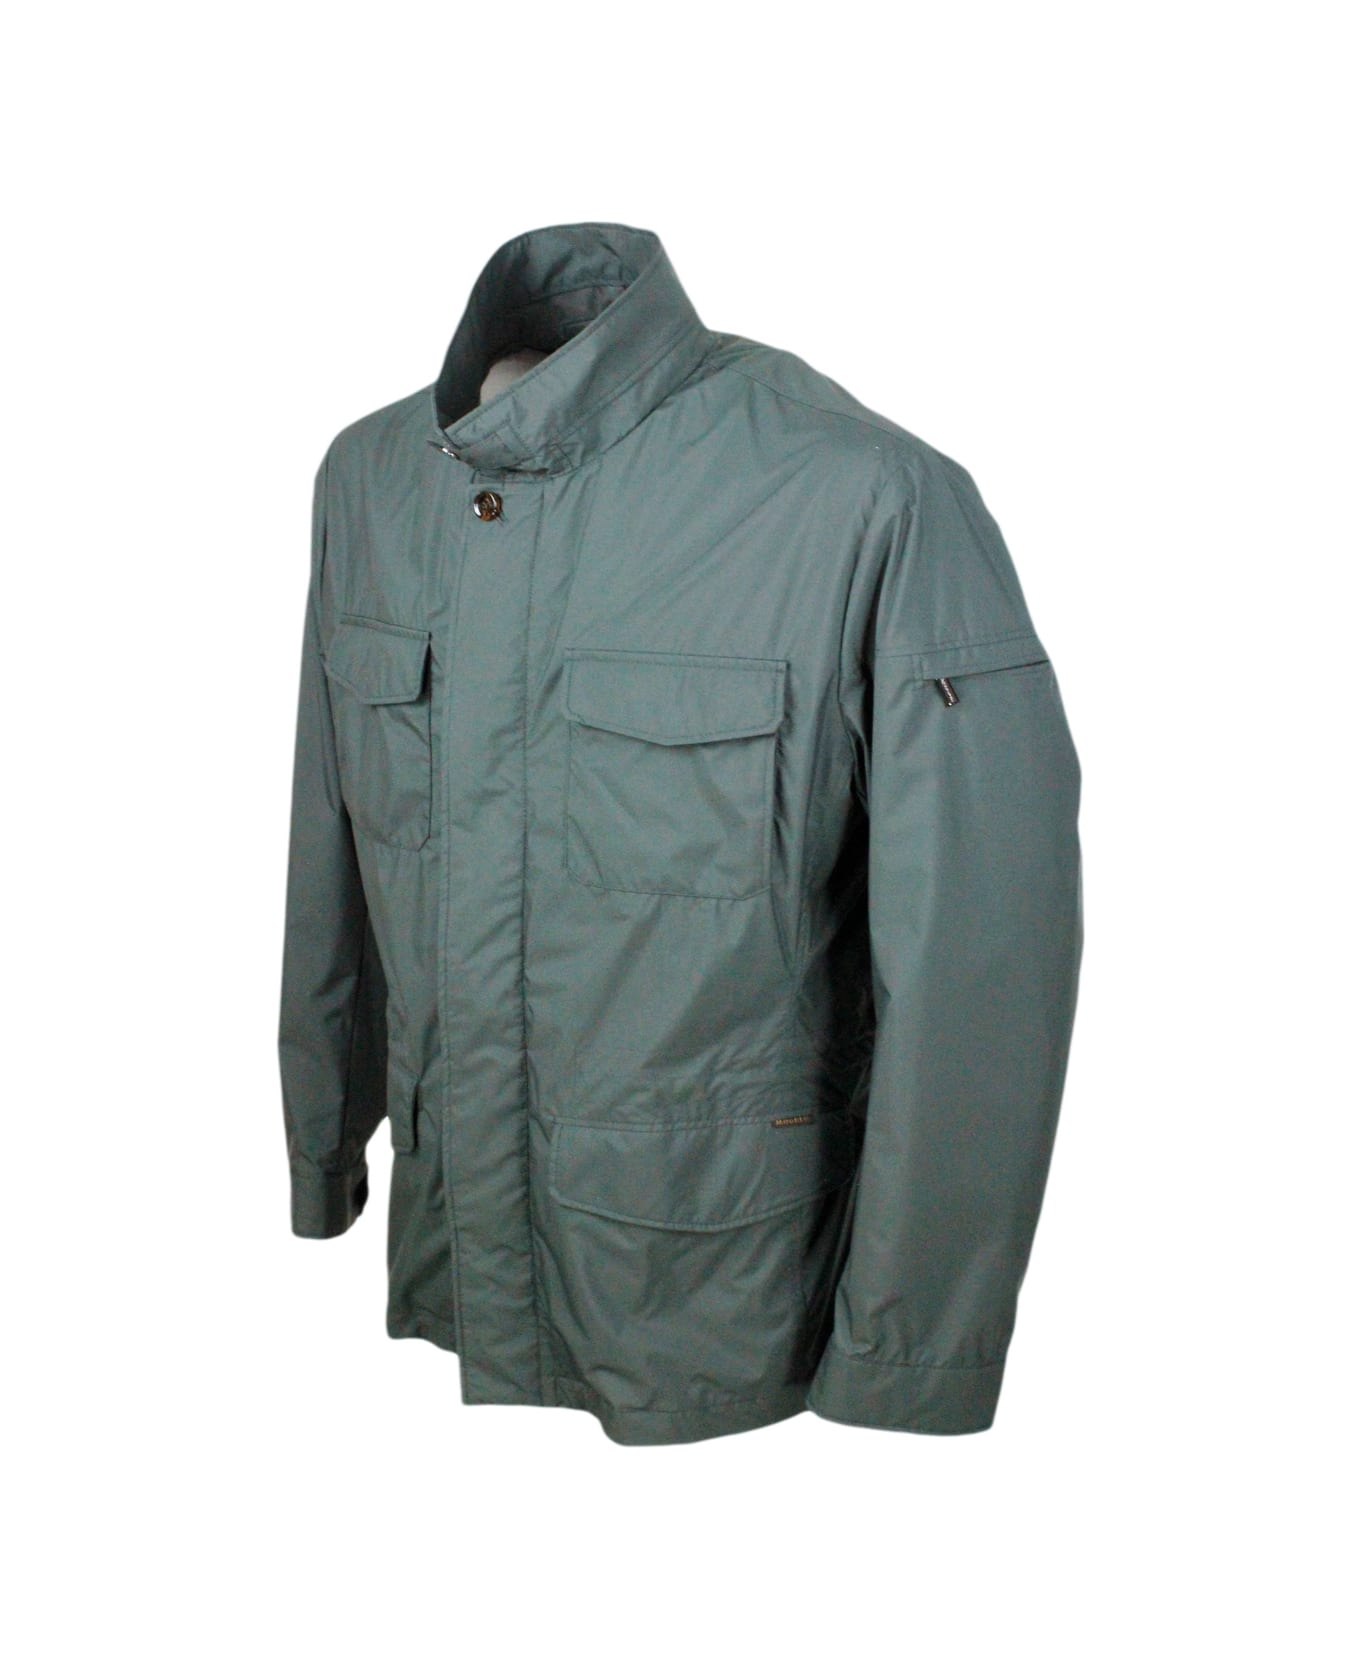 Moorer Fieldsd Jacket Made Of Waterproof Technical Fabric. Patch Pockets On The Chest And Adjustable Drawstring Waist. - Forest